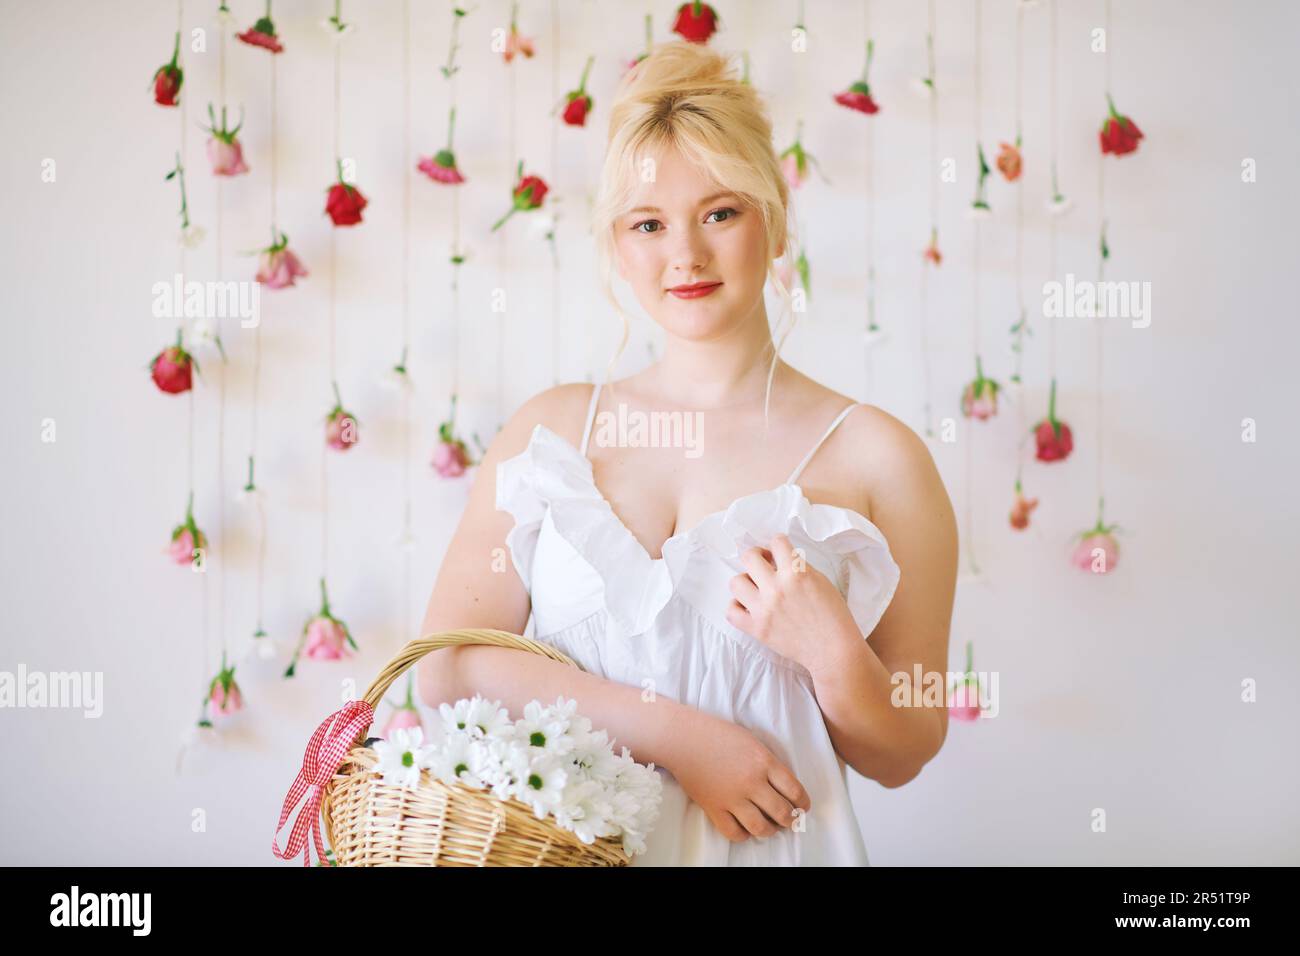 Studio portrait of pretty young teenage 15 - 16 year old girl wearing summer dress, posing on white background with hanging roses, holding basket with Stock Photo